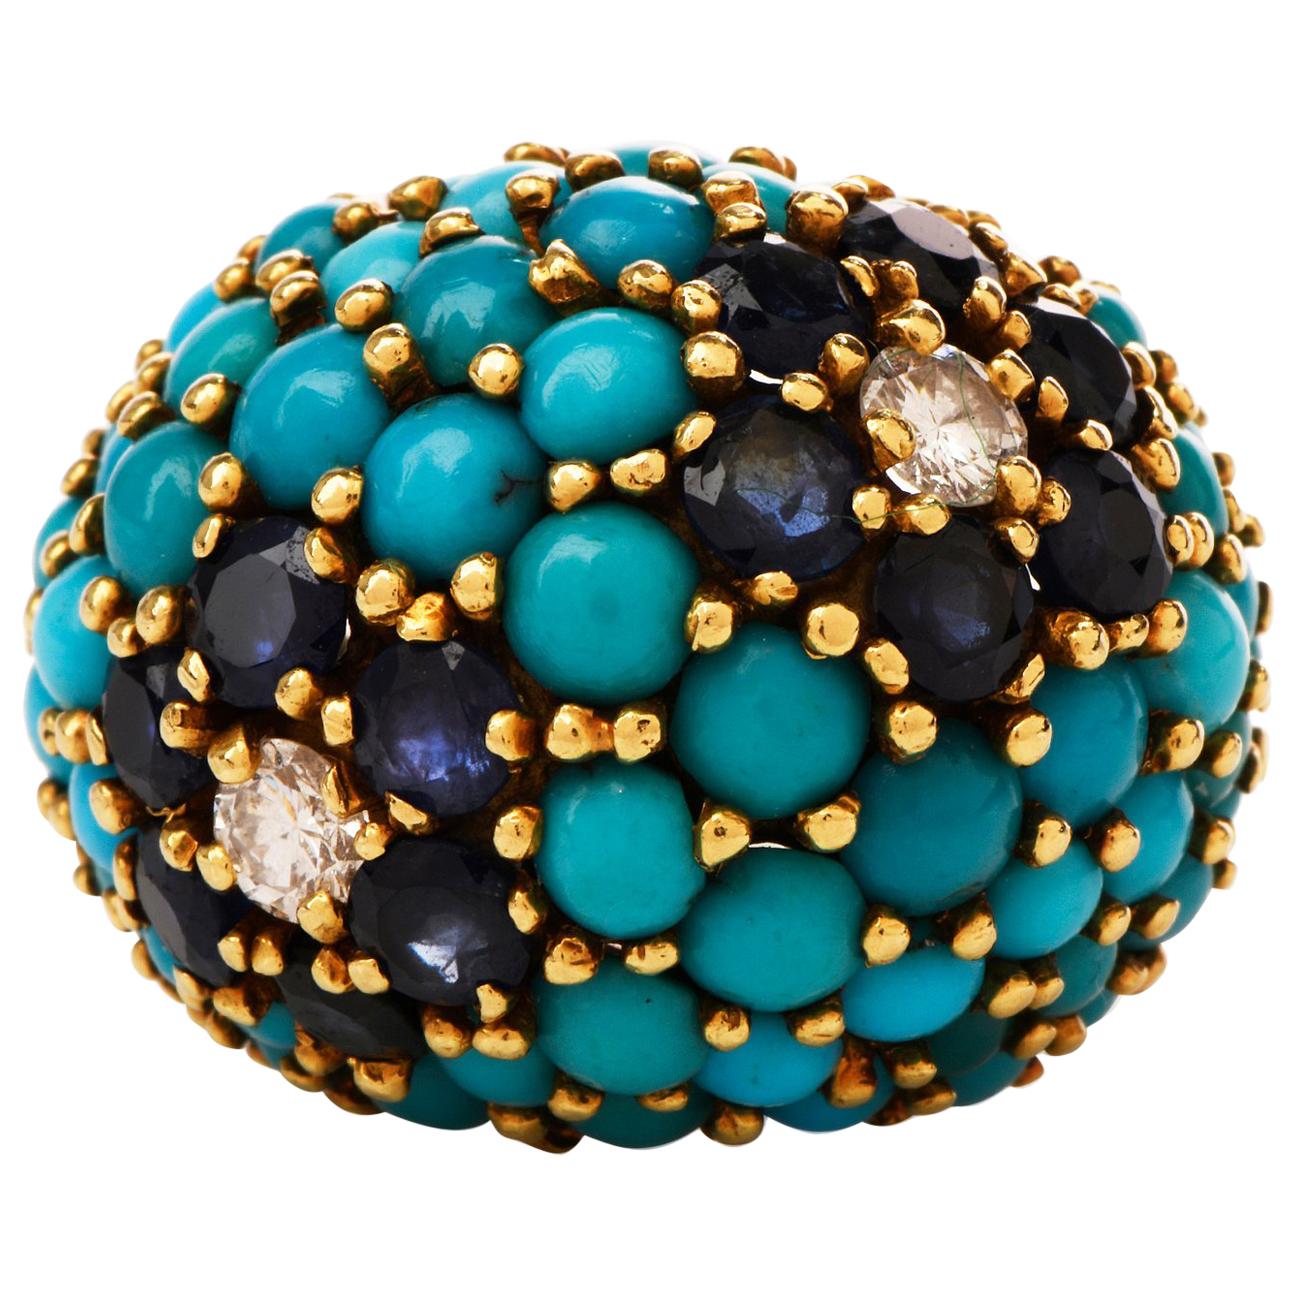  This beautiful vintage circa 1960s flower multi-gem cocktail cluster ring is crafted in 18-karat yellow gold, weighing 14.7 grams and measuring 17mm x 11mm high. Composed of a cluster of prong-set round cabochon Persian turquoise. Showing 12